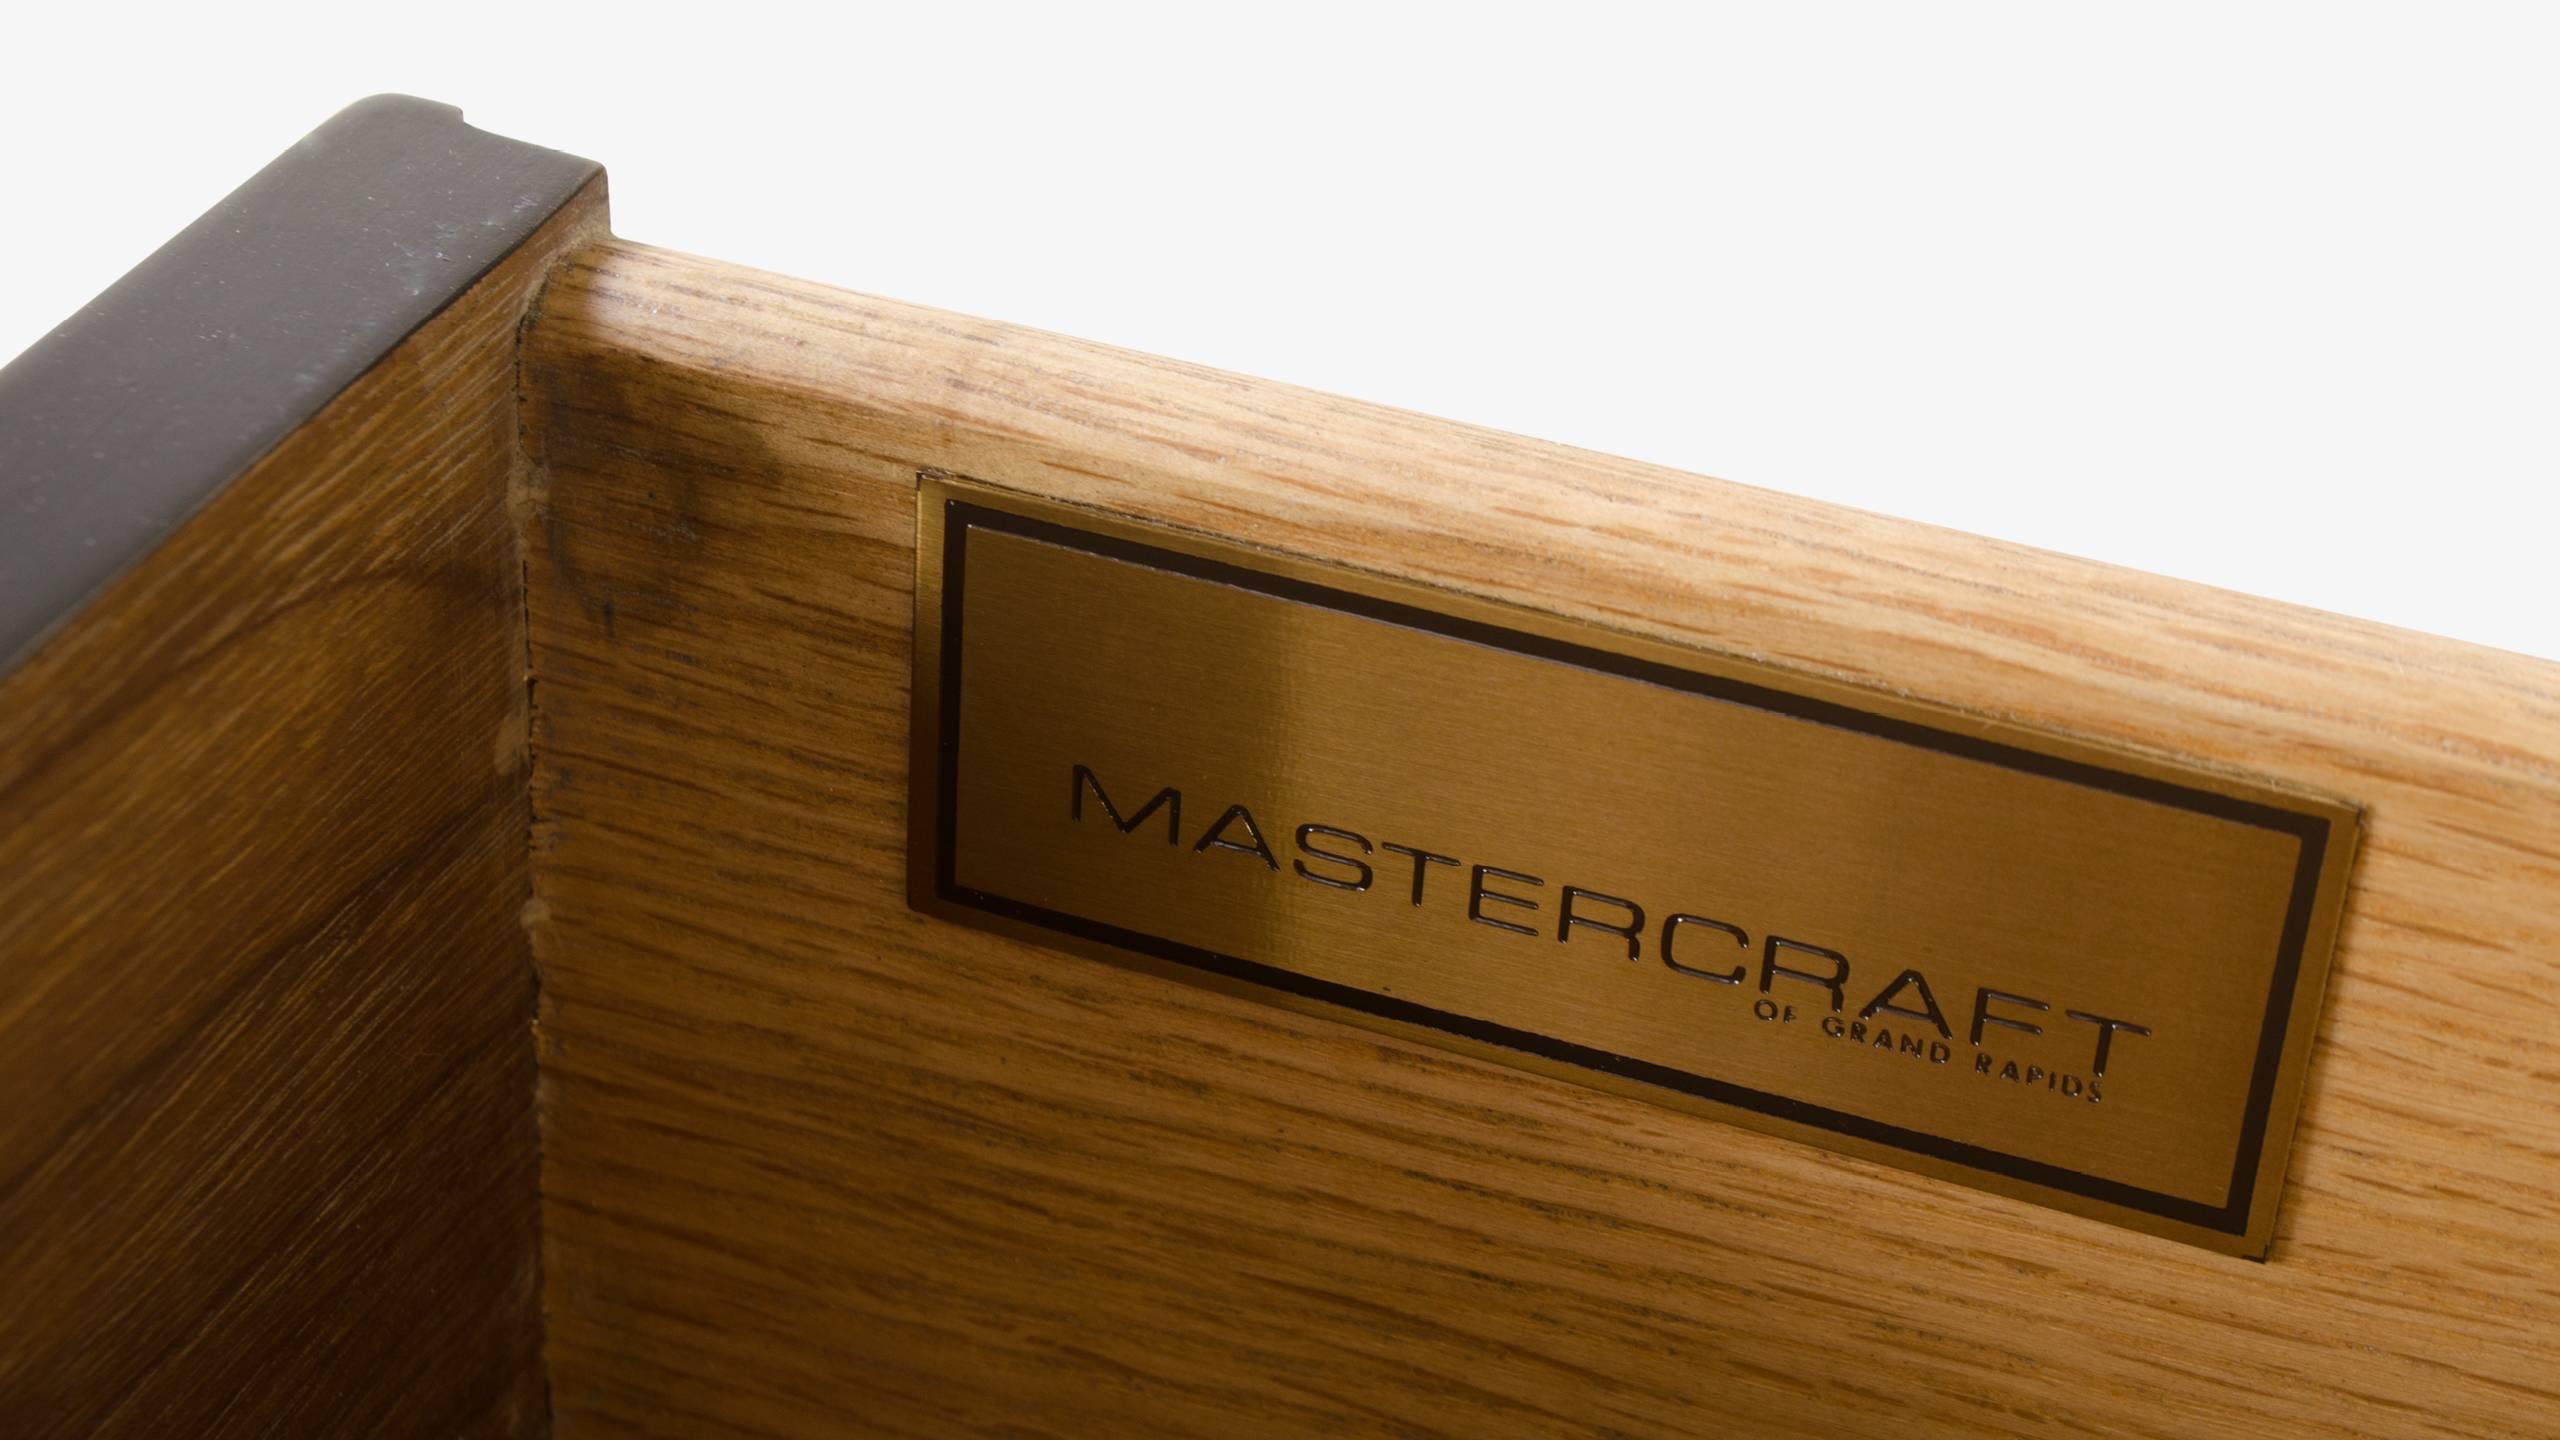 Late 20th Century Ebony Lacquer and Polished Brass Credenza by Mastercraft